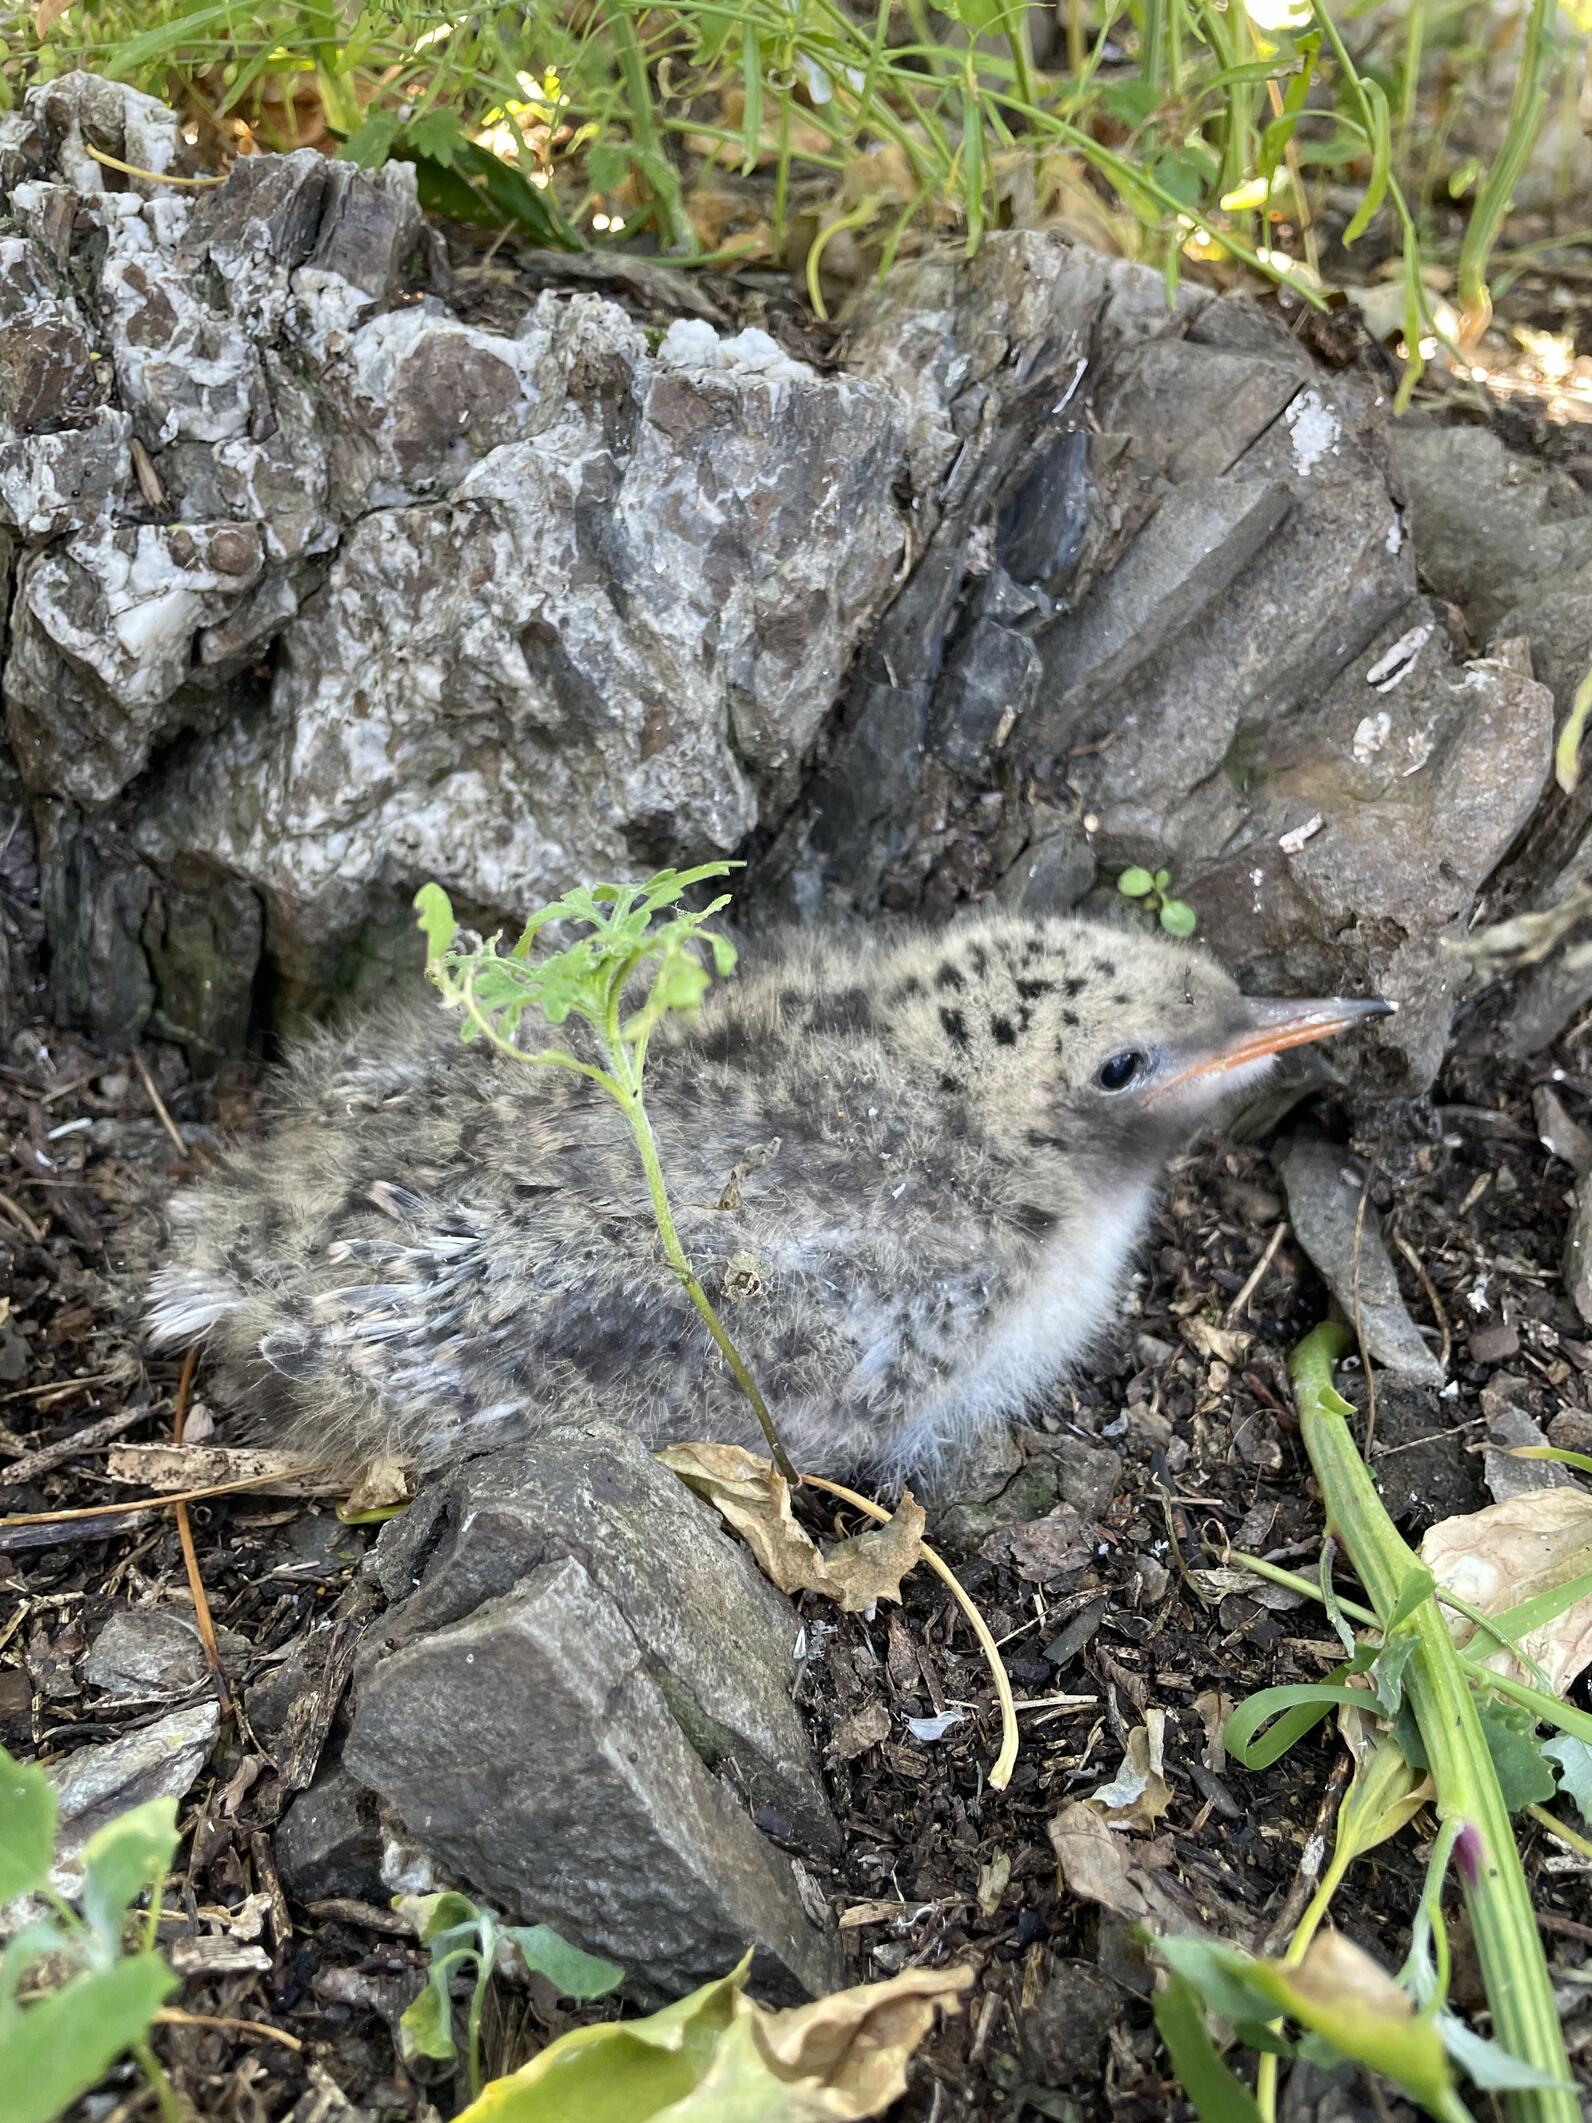 A fluffy Common Tern chick hides among rocks and grasses.